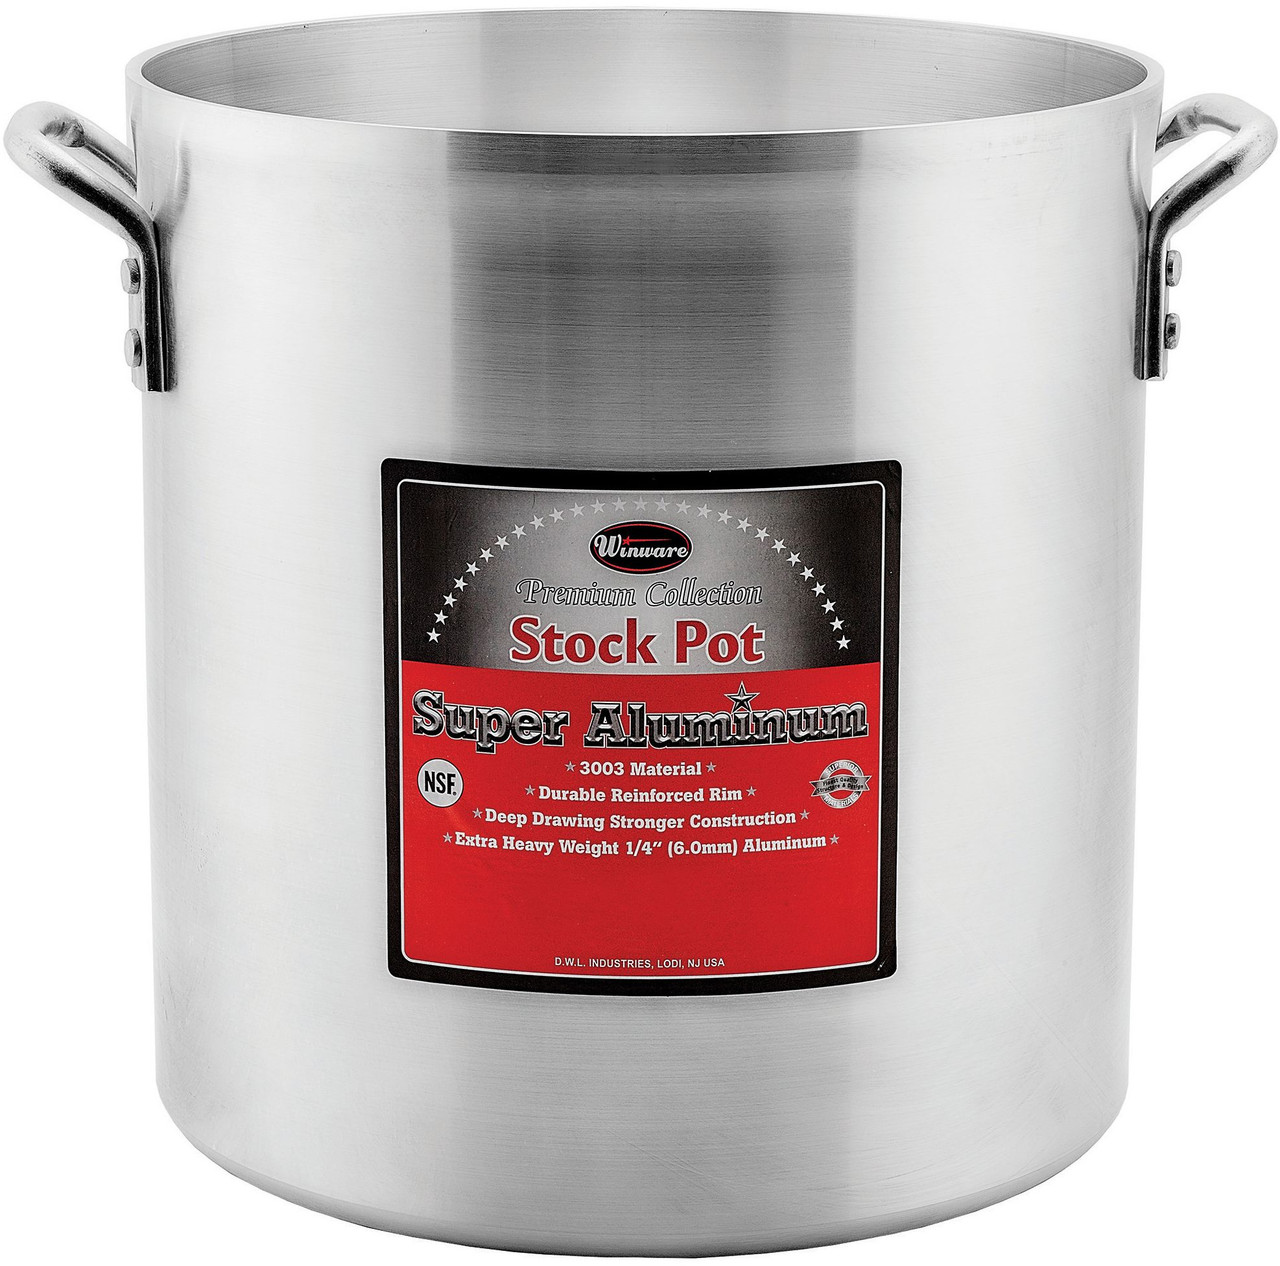 Winco AXHH-12 12 Qt. Stock Pot - Cover Not Included